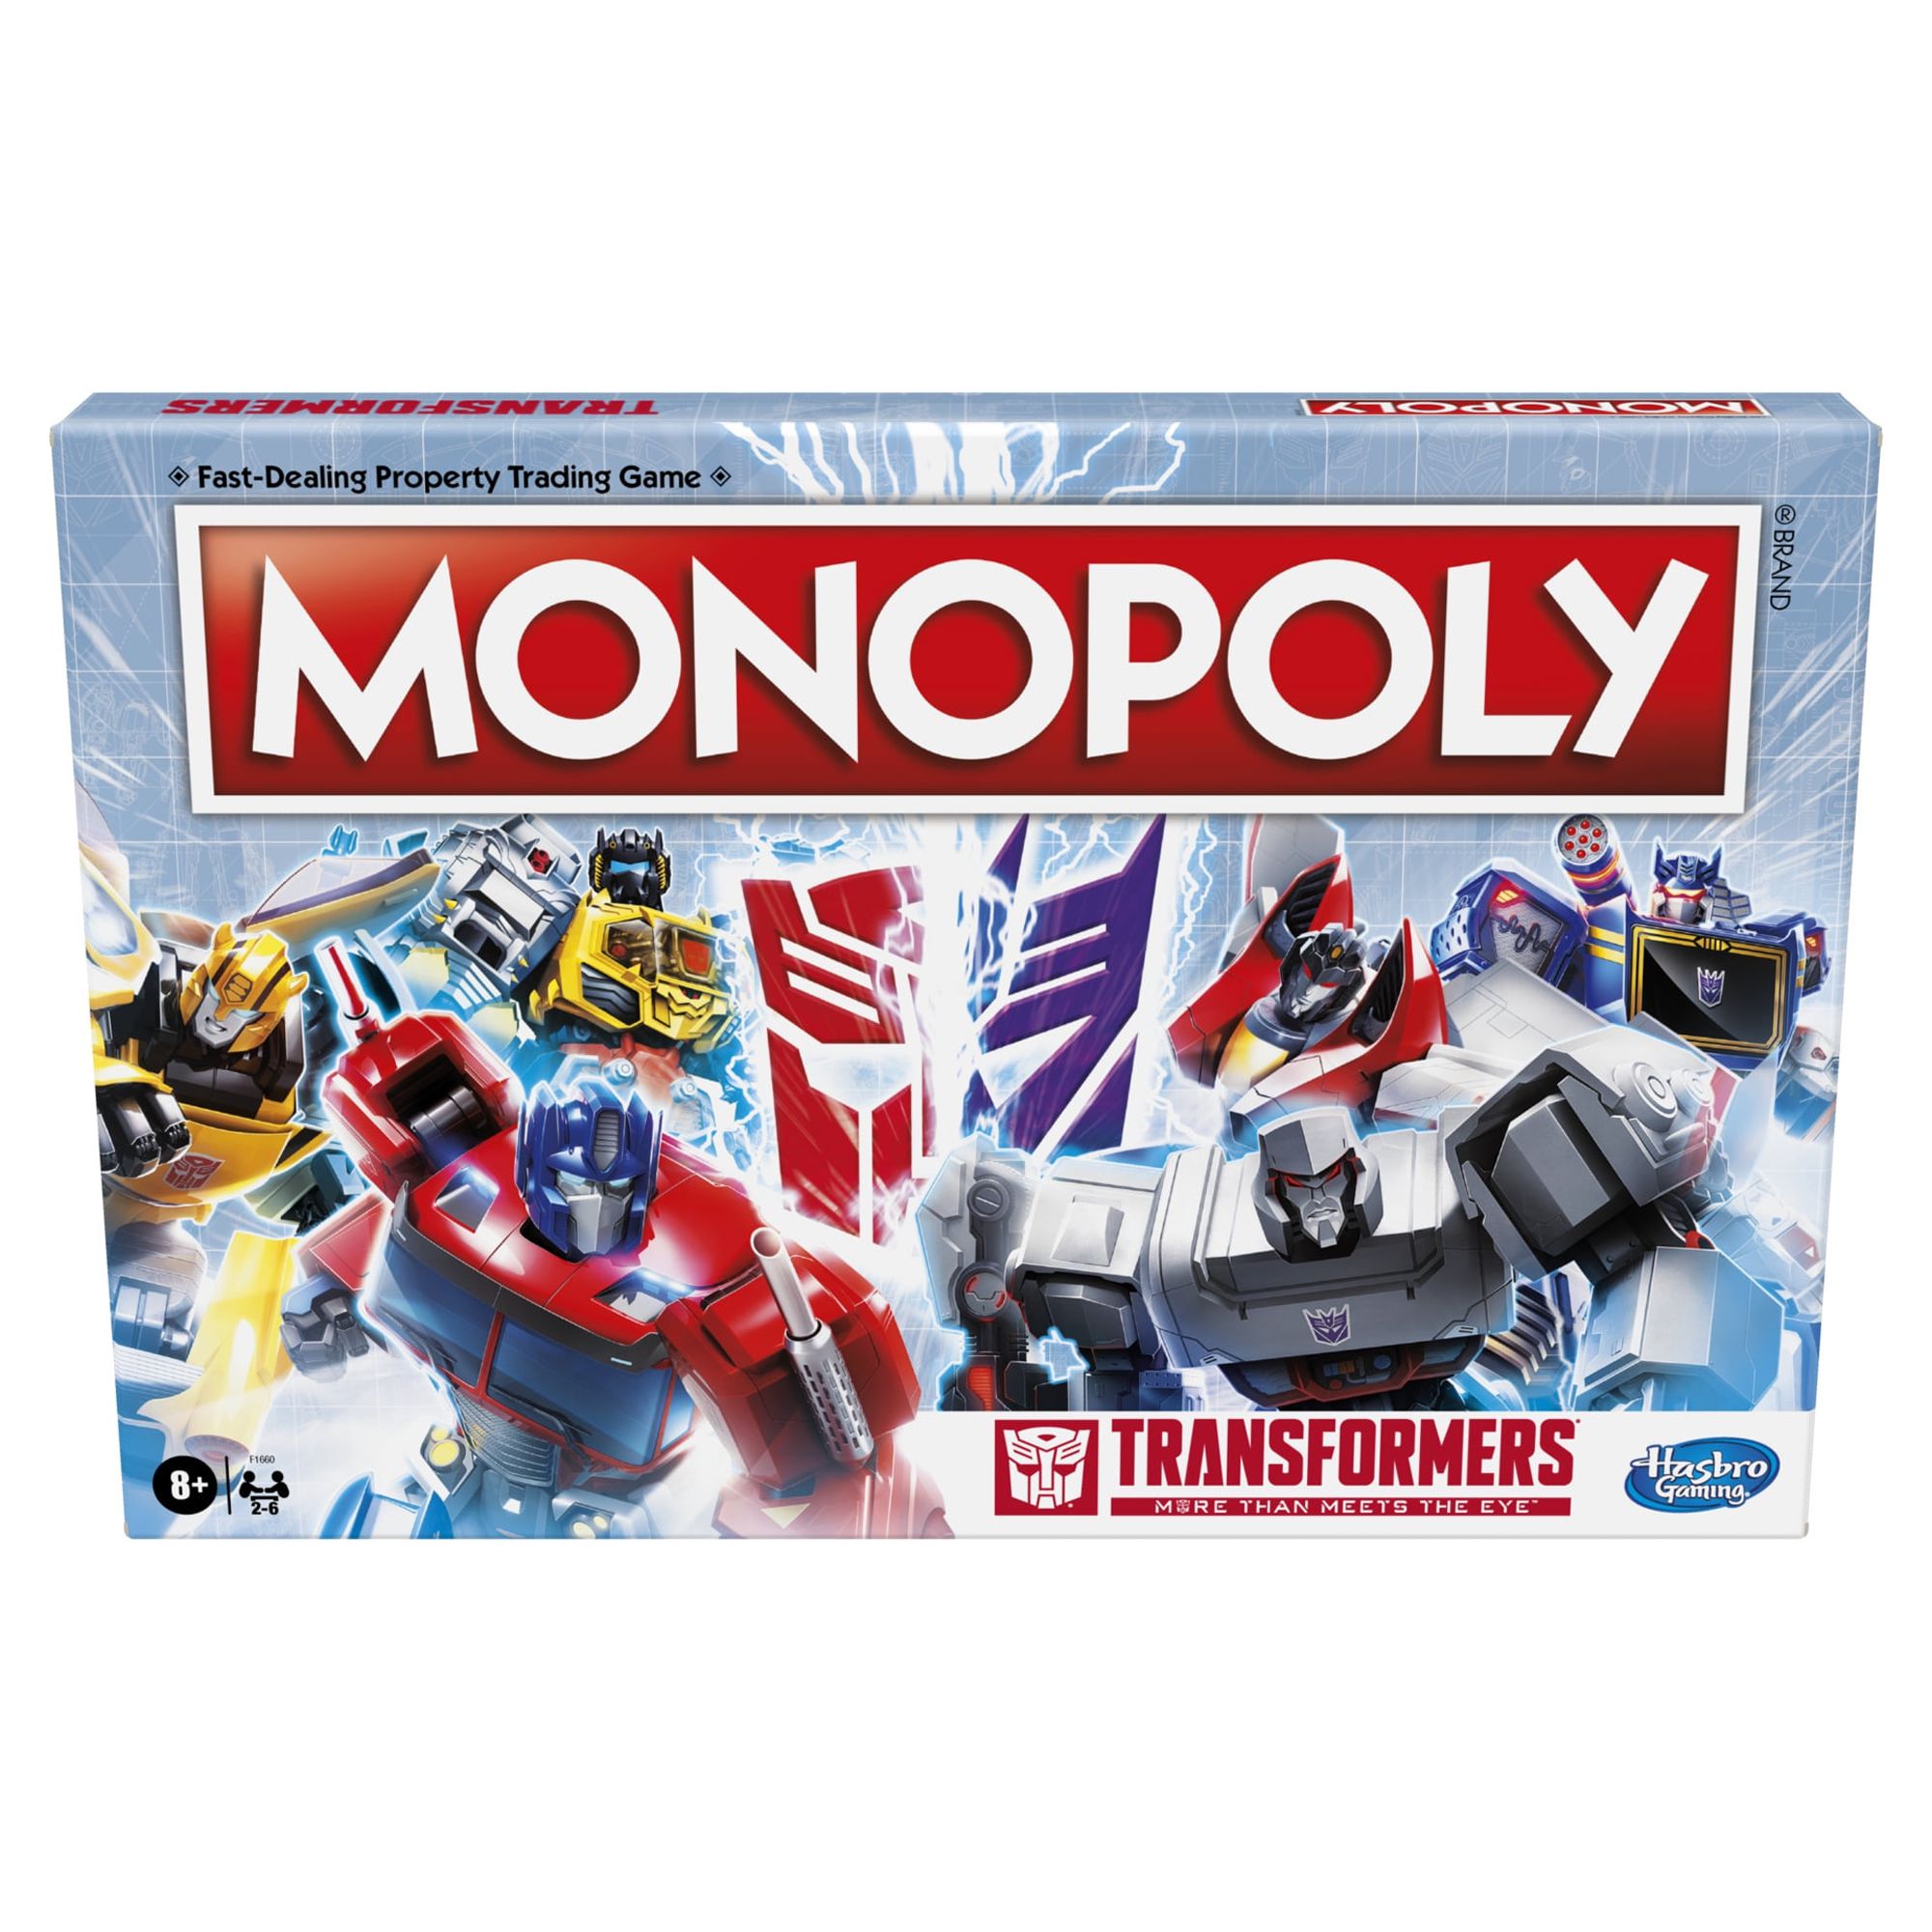 Monopoly Transformers Edition Board Game for Kids and Family Ages 8 and Up, 2-6 Players - image 1 of 7